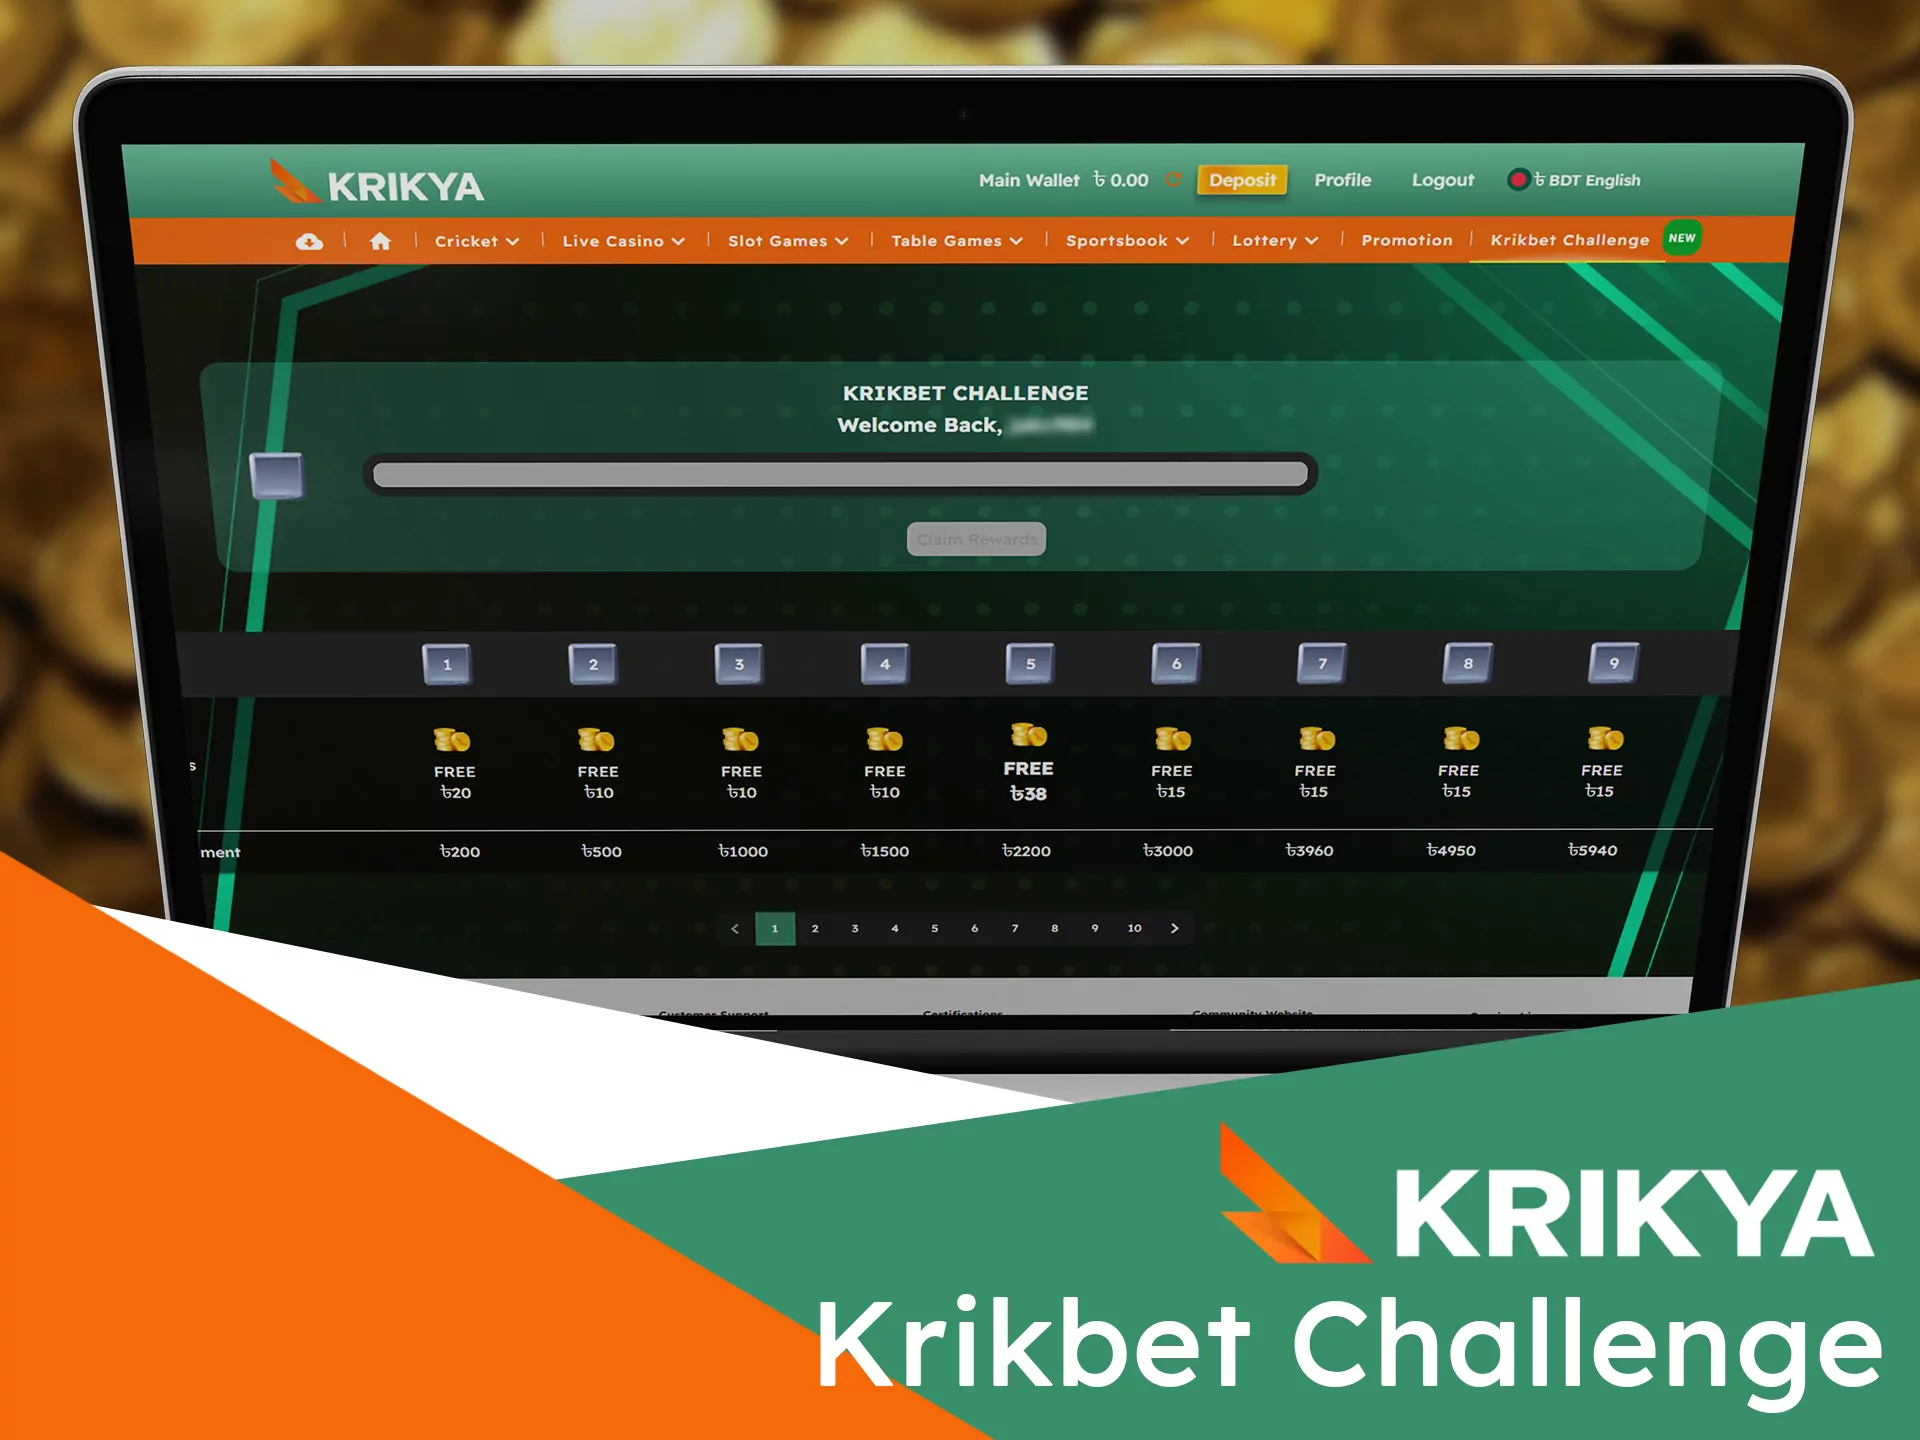 Check for Krikya special bonus challenge and earn extra money.